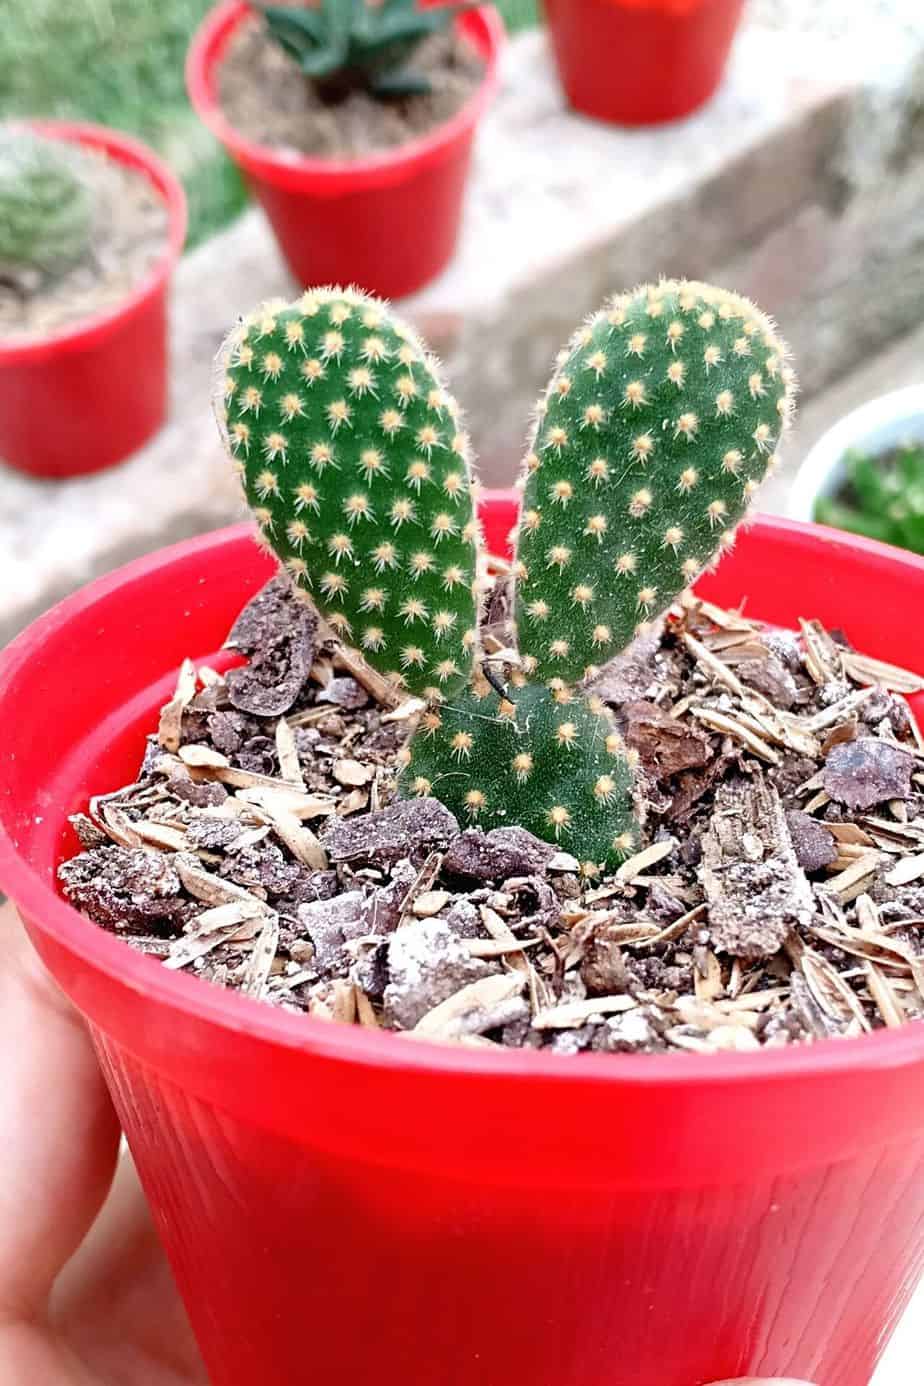 If you're looking for a cheap yet attractive plant to grow by your southwest facing garden, Bunny Ears Cactus is your best bet